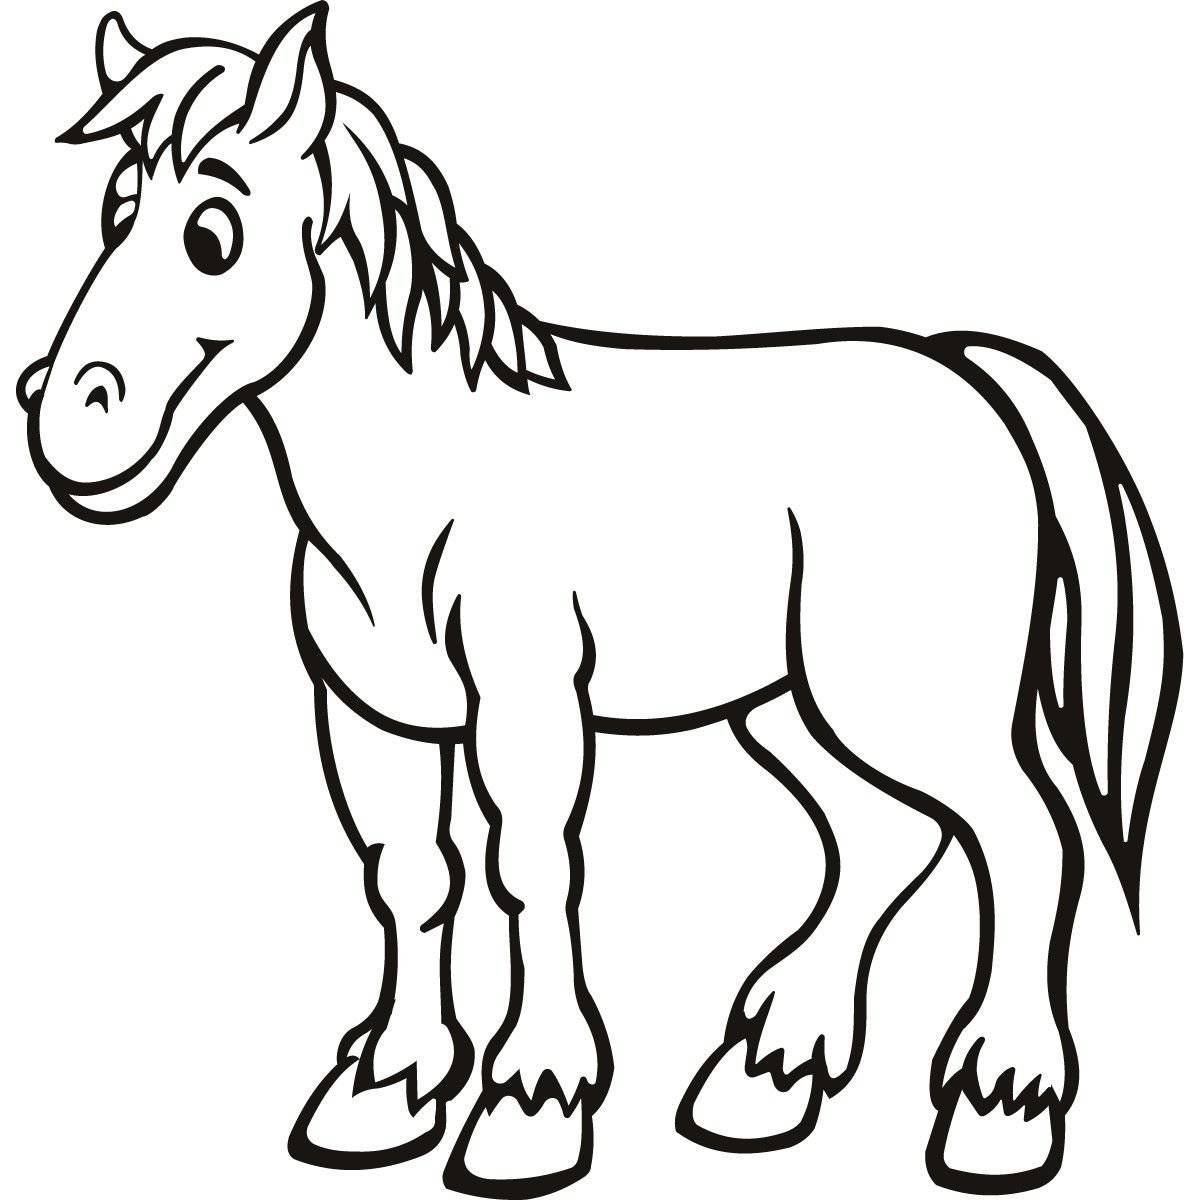 Printing Icelandic horse coloring book for kids